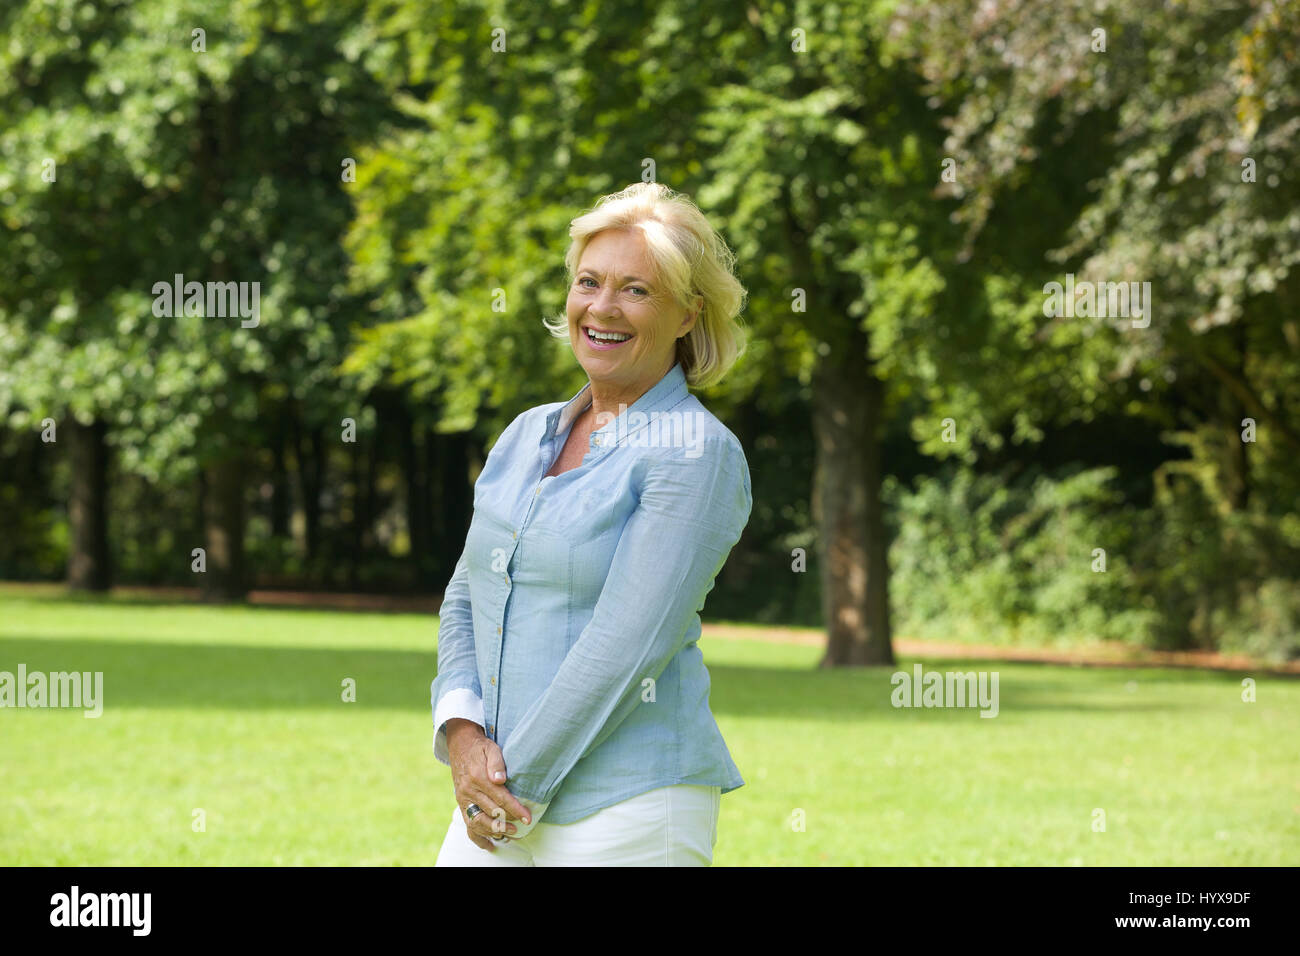 Portrait of a happy older woman smiling outdoors Stock Photo